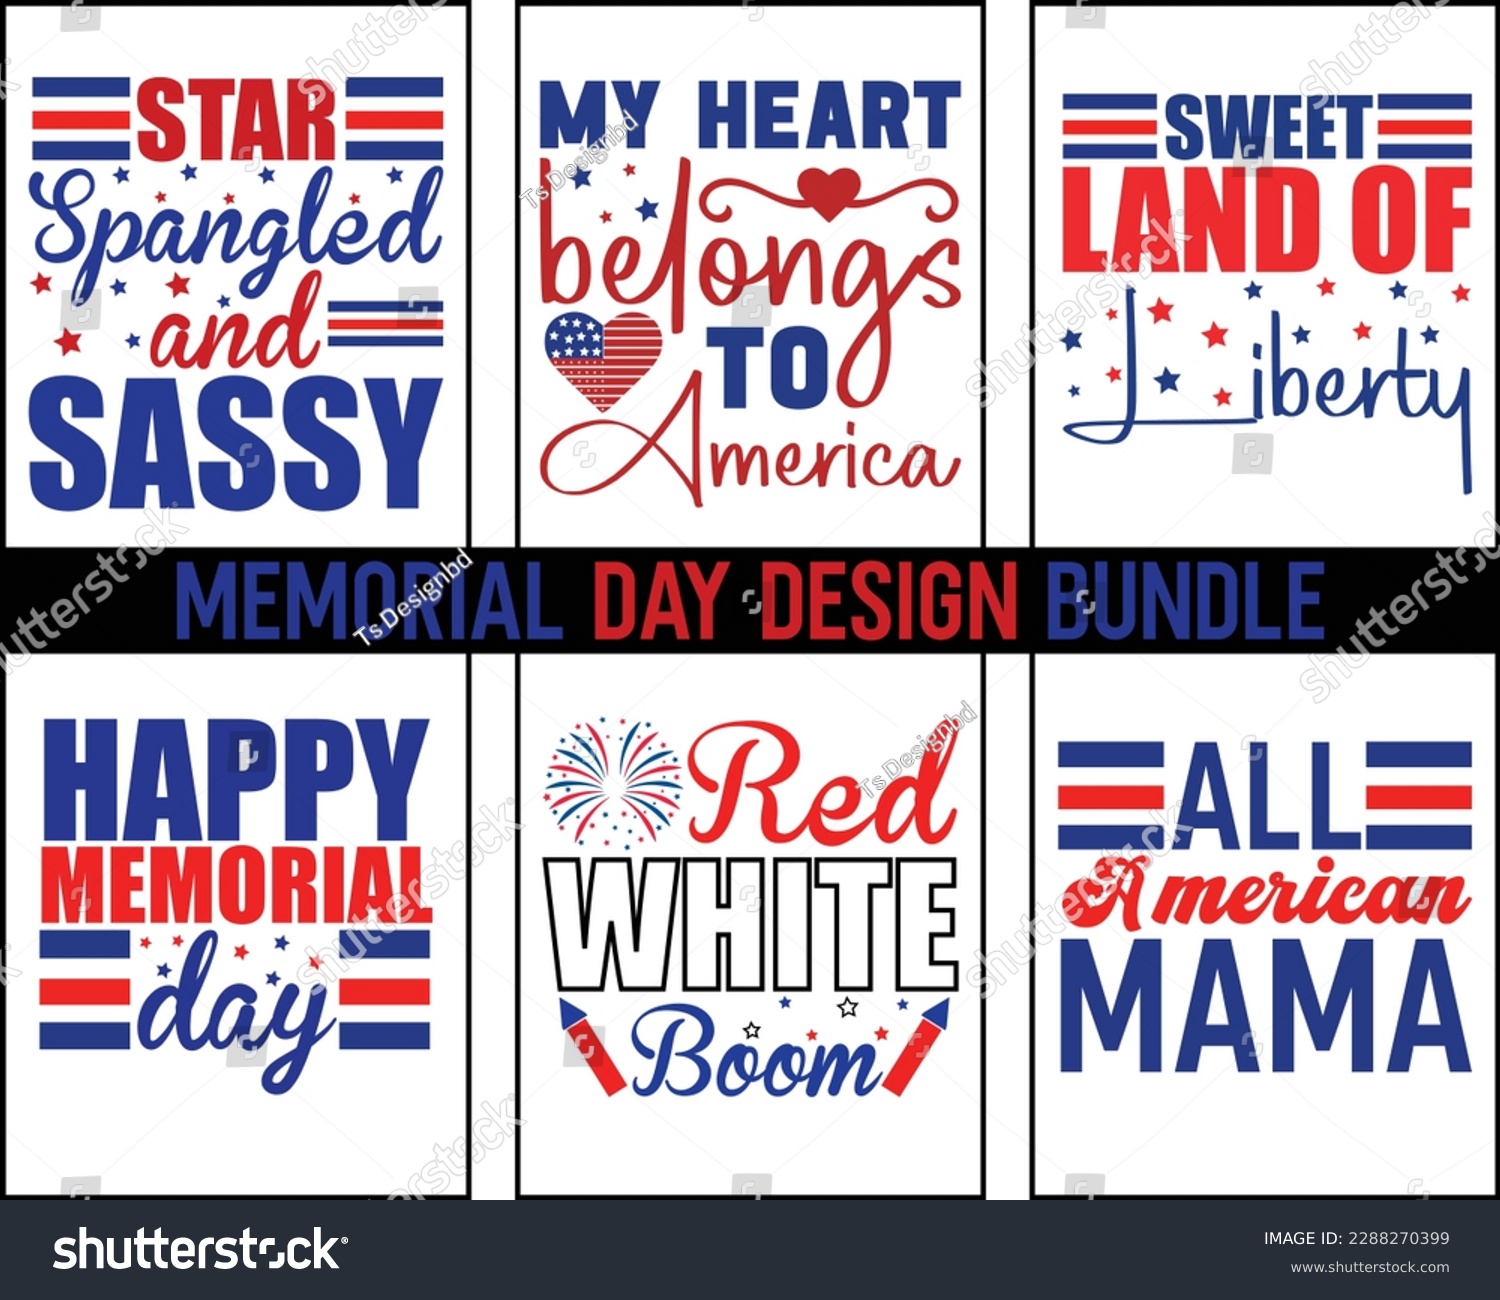 SVG of Memorial Day Svg Bundle Design,Happy memorial day svg,American Flag Svg, USA Svg, Military Svg,Veteran t-shirt design,Calligraphy graphic design typography and Hand written svg